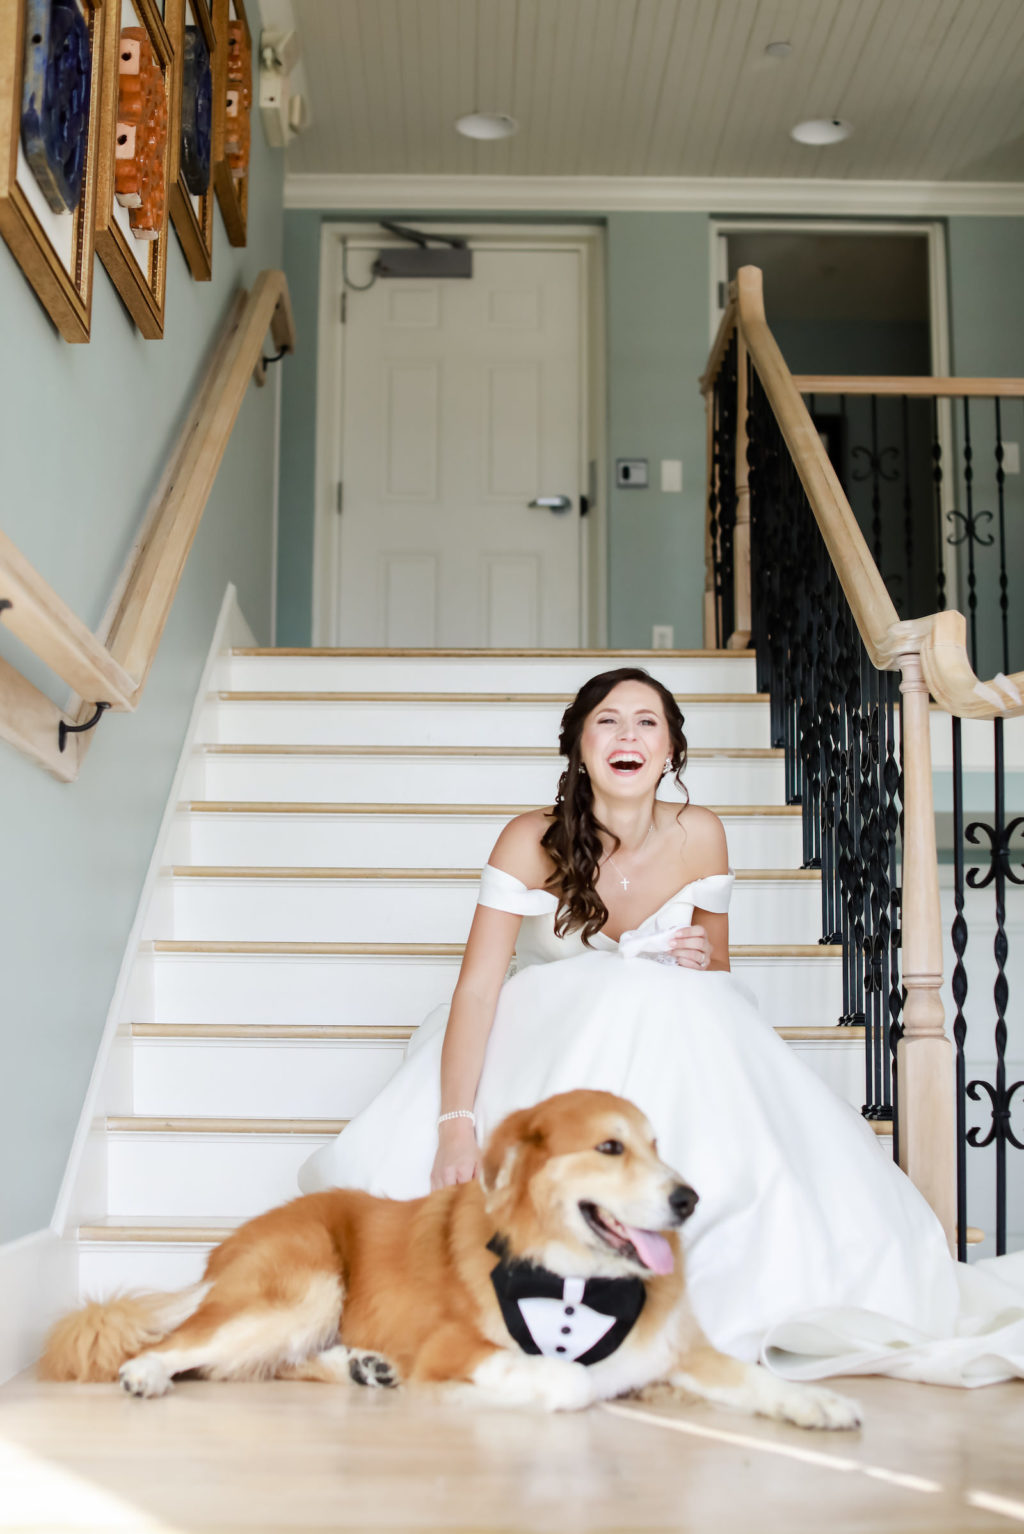 Elegant Classic Bride on Staircase Wearing Off the Shoulder Wedding Dress with Dog in Tuxedo | Tampa Bay Wedding Photographer Lifelong Photography Studio | Clearwater Beach Pet Planner FairyTail Pet Care | Wedding Hair and Makeup Adore Bridal